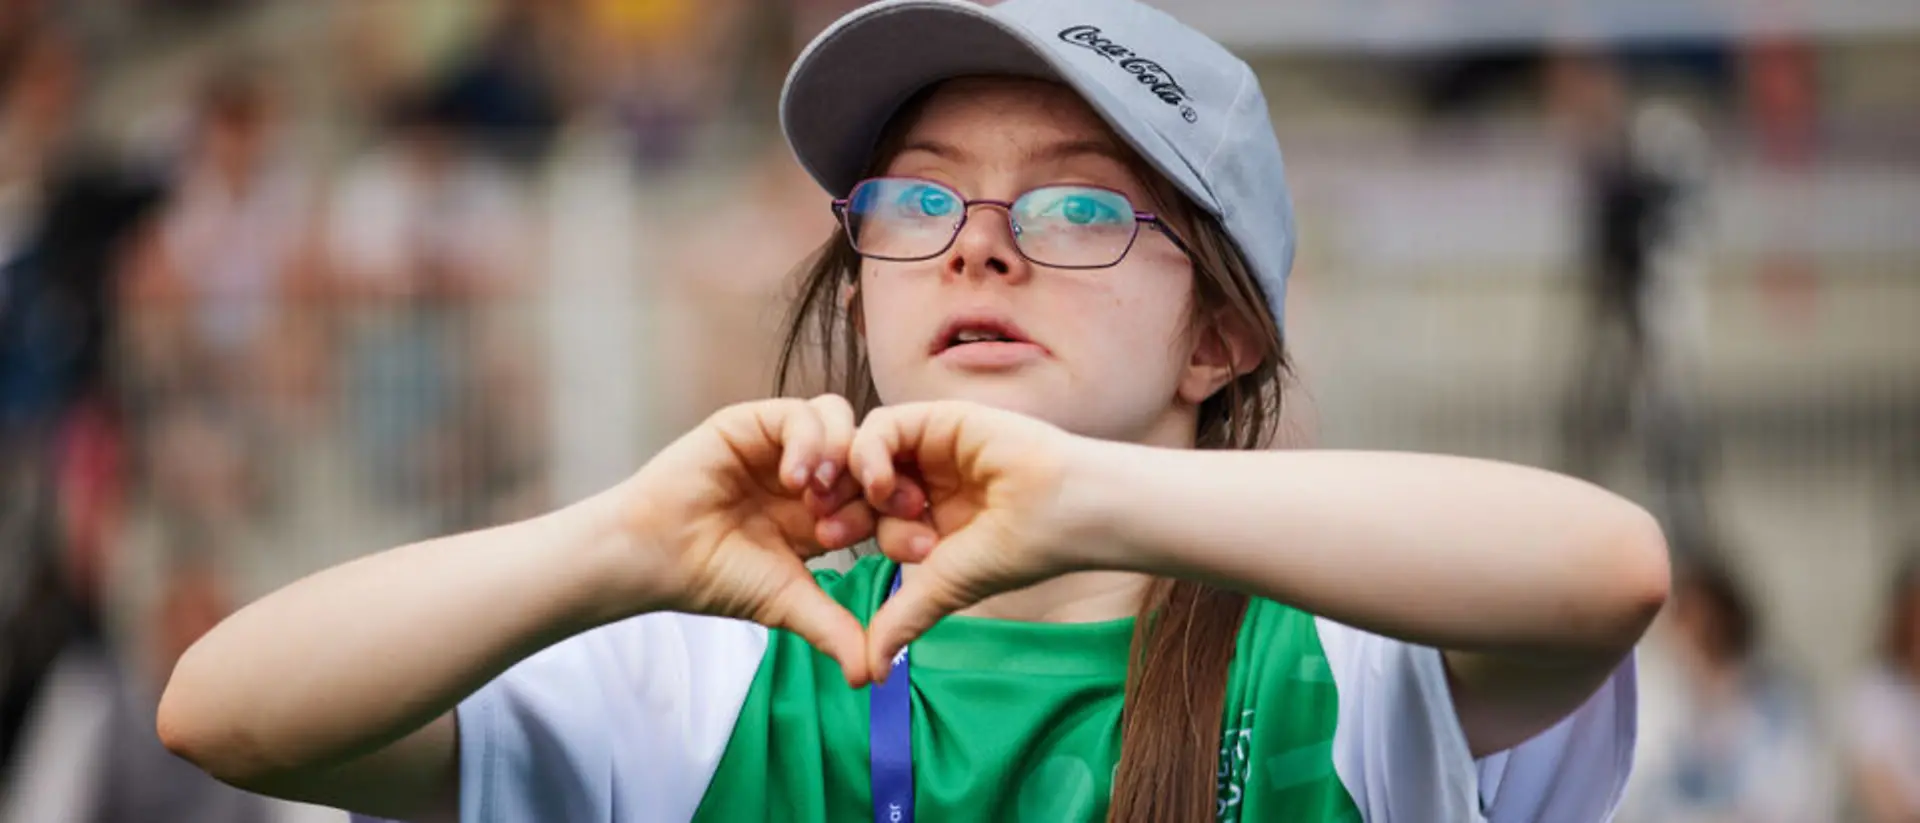 A girl forms a heart with her hands.